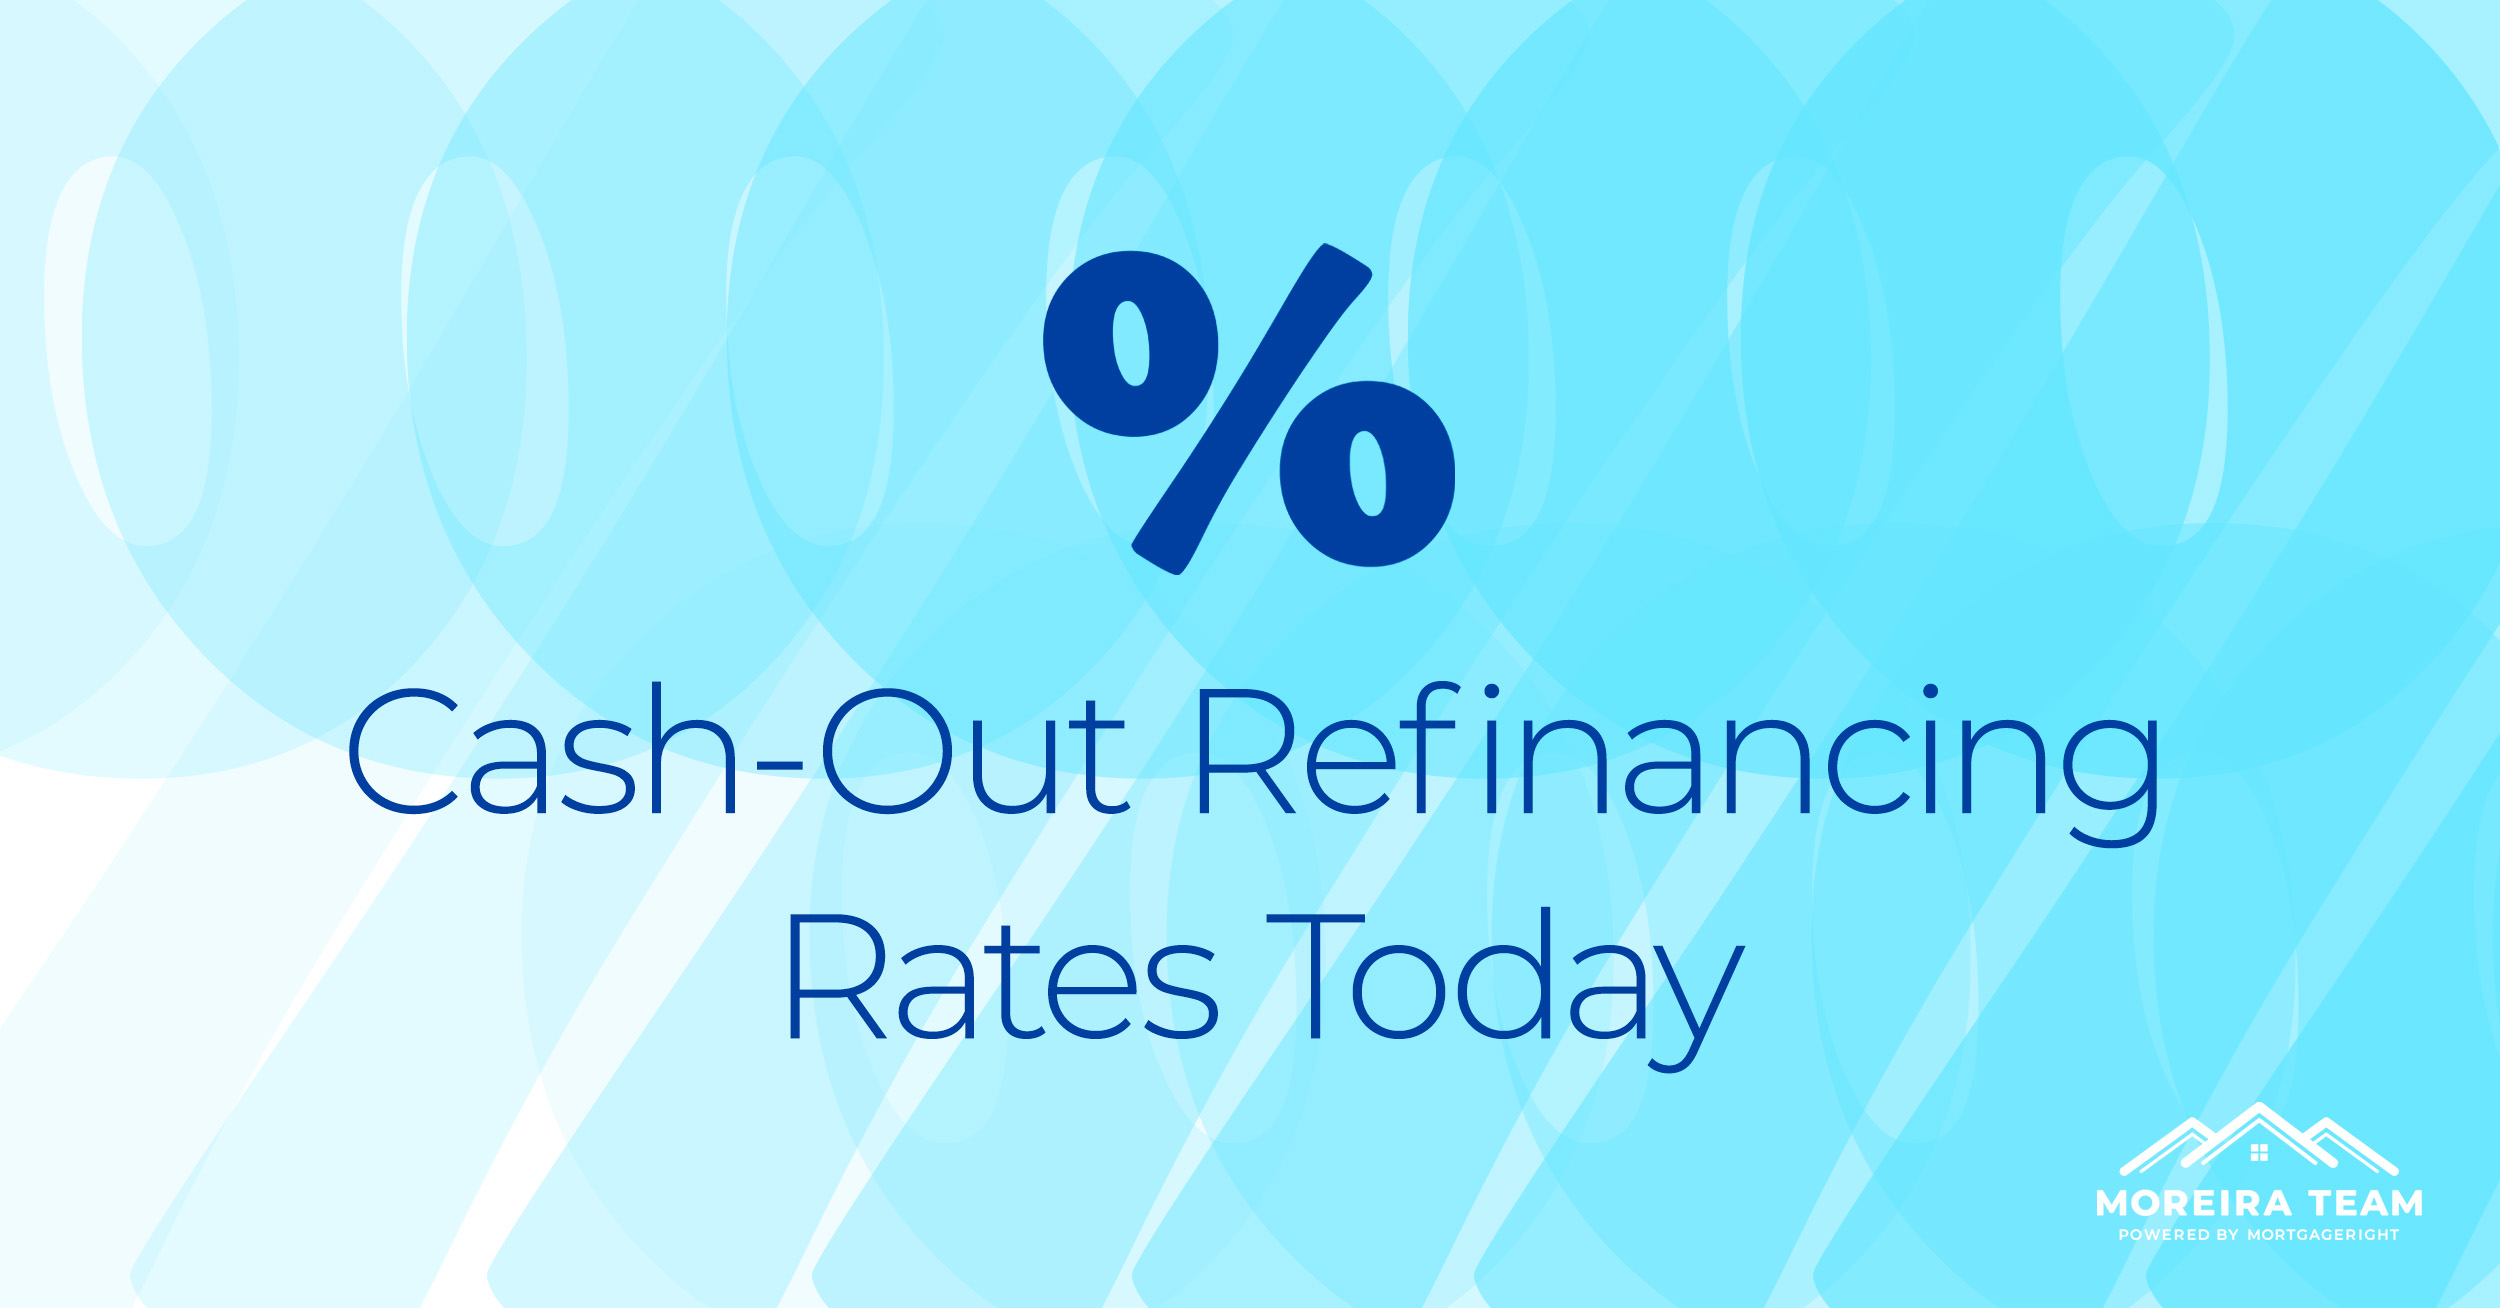 Cash-Out Refinancing Rates Today